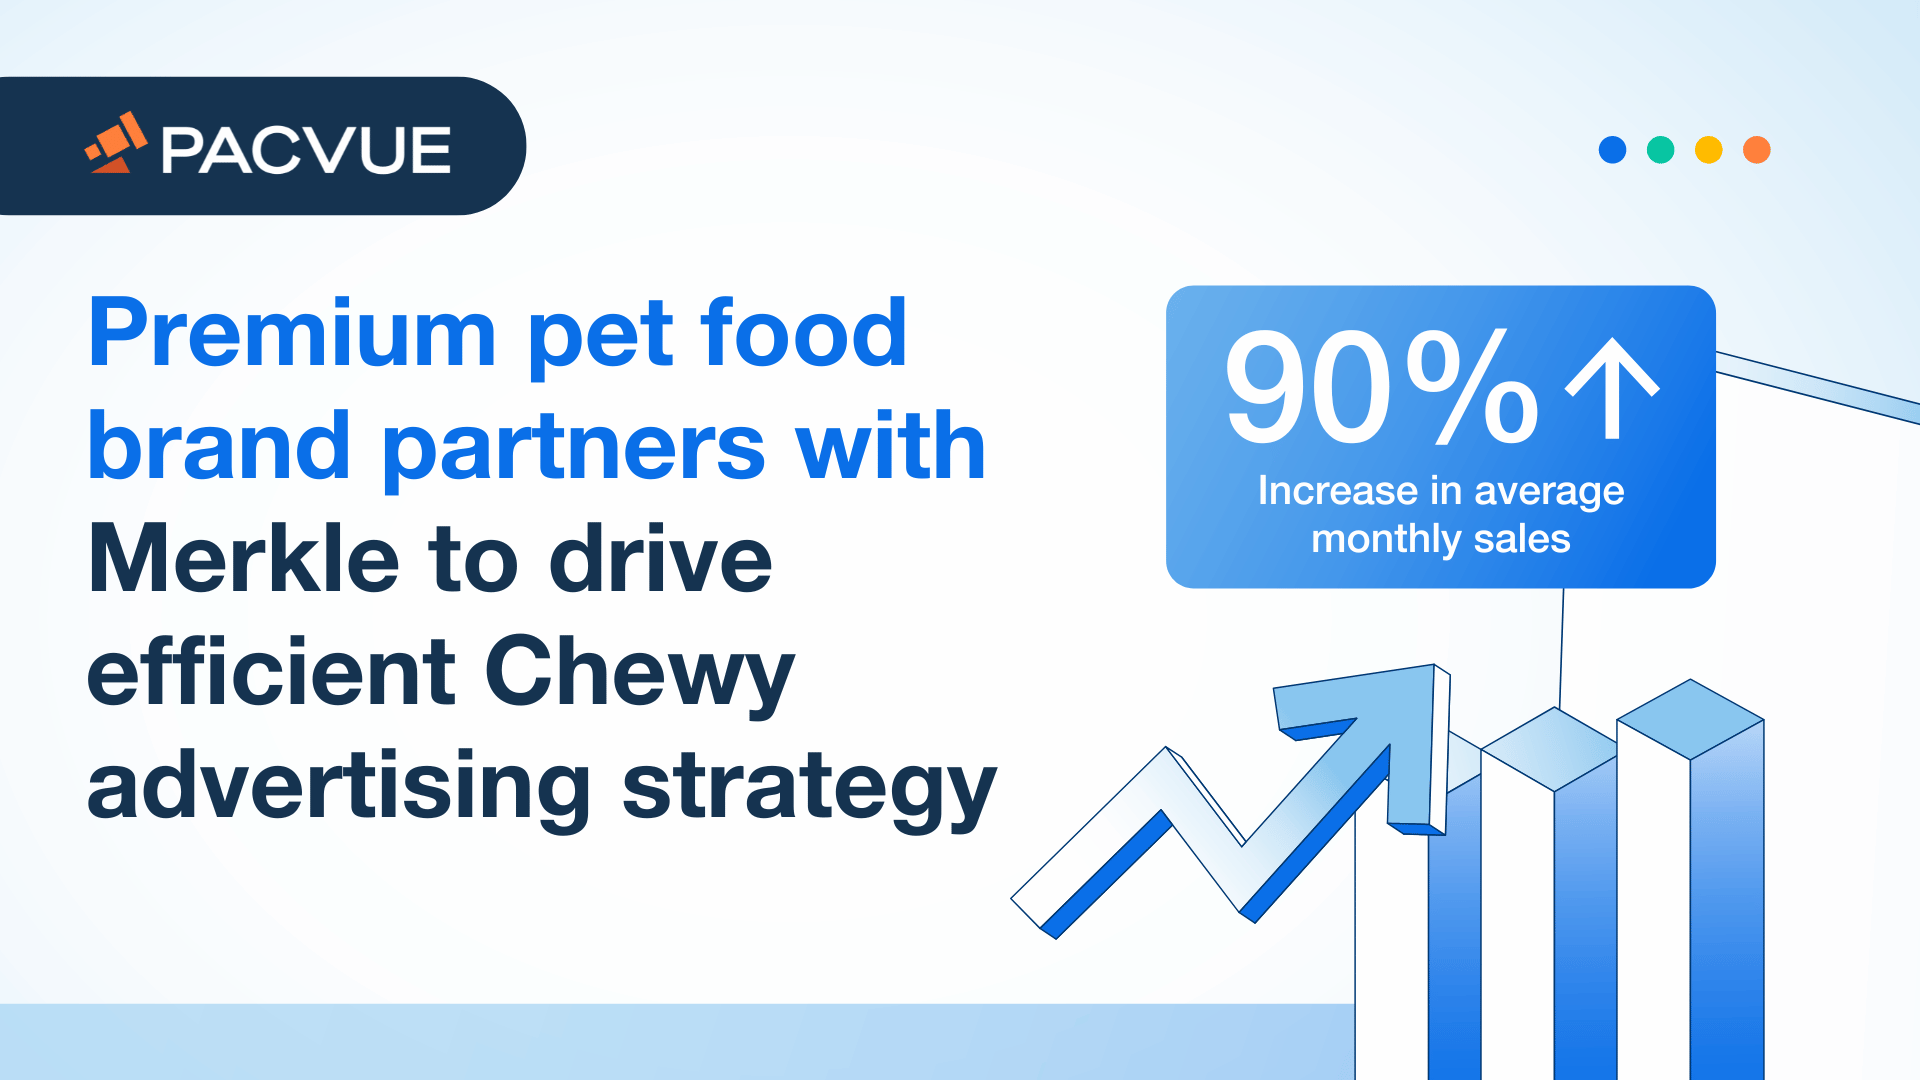 Premium pet food brand partners with Merkle to drive efficient Chewy advertising strategy